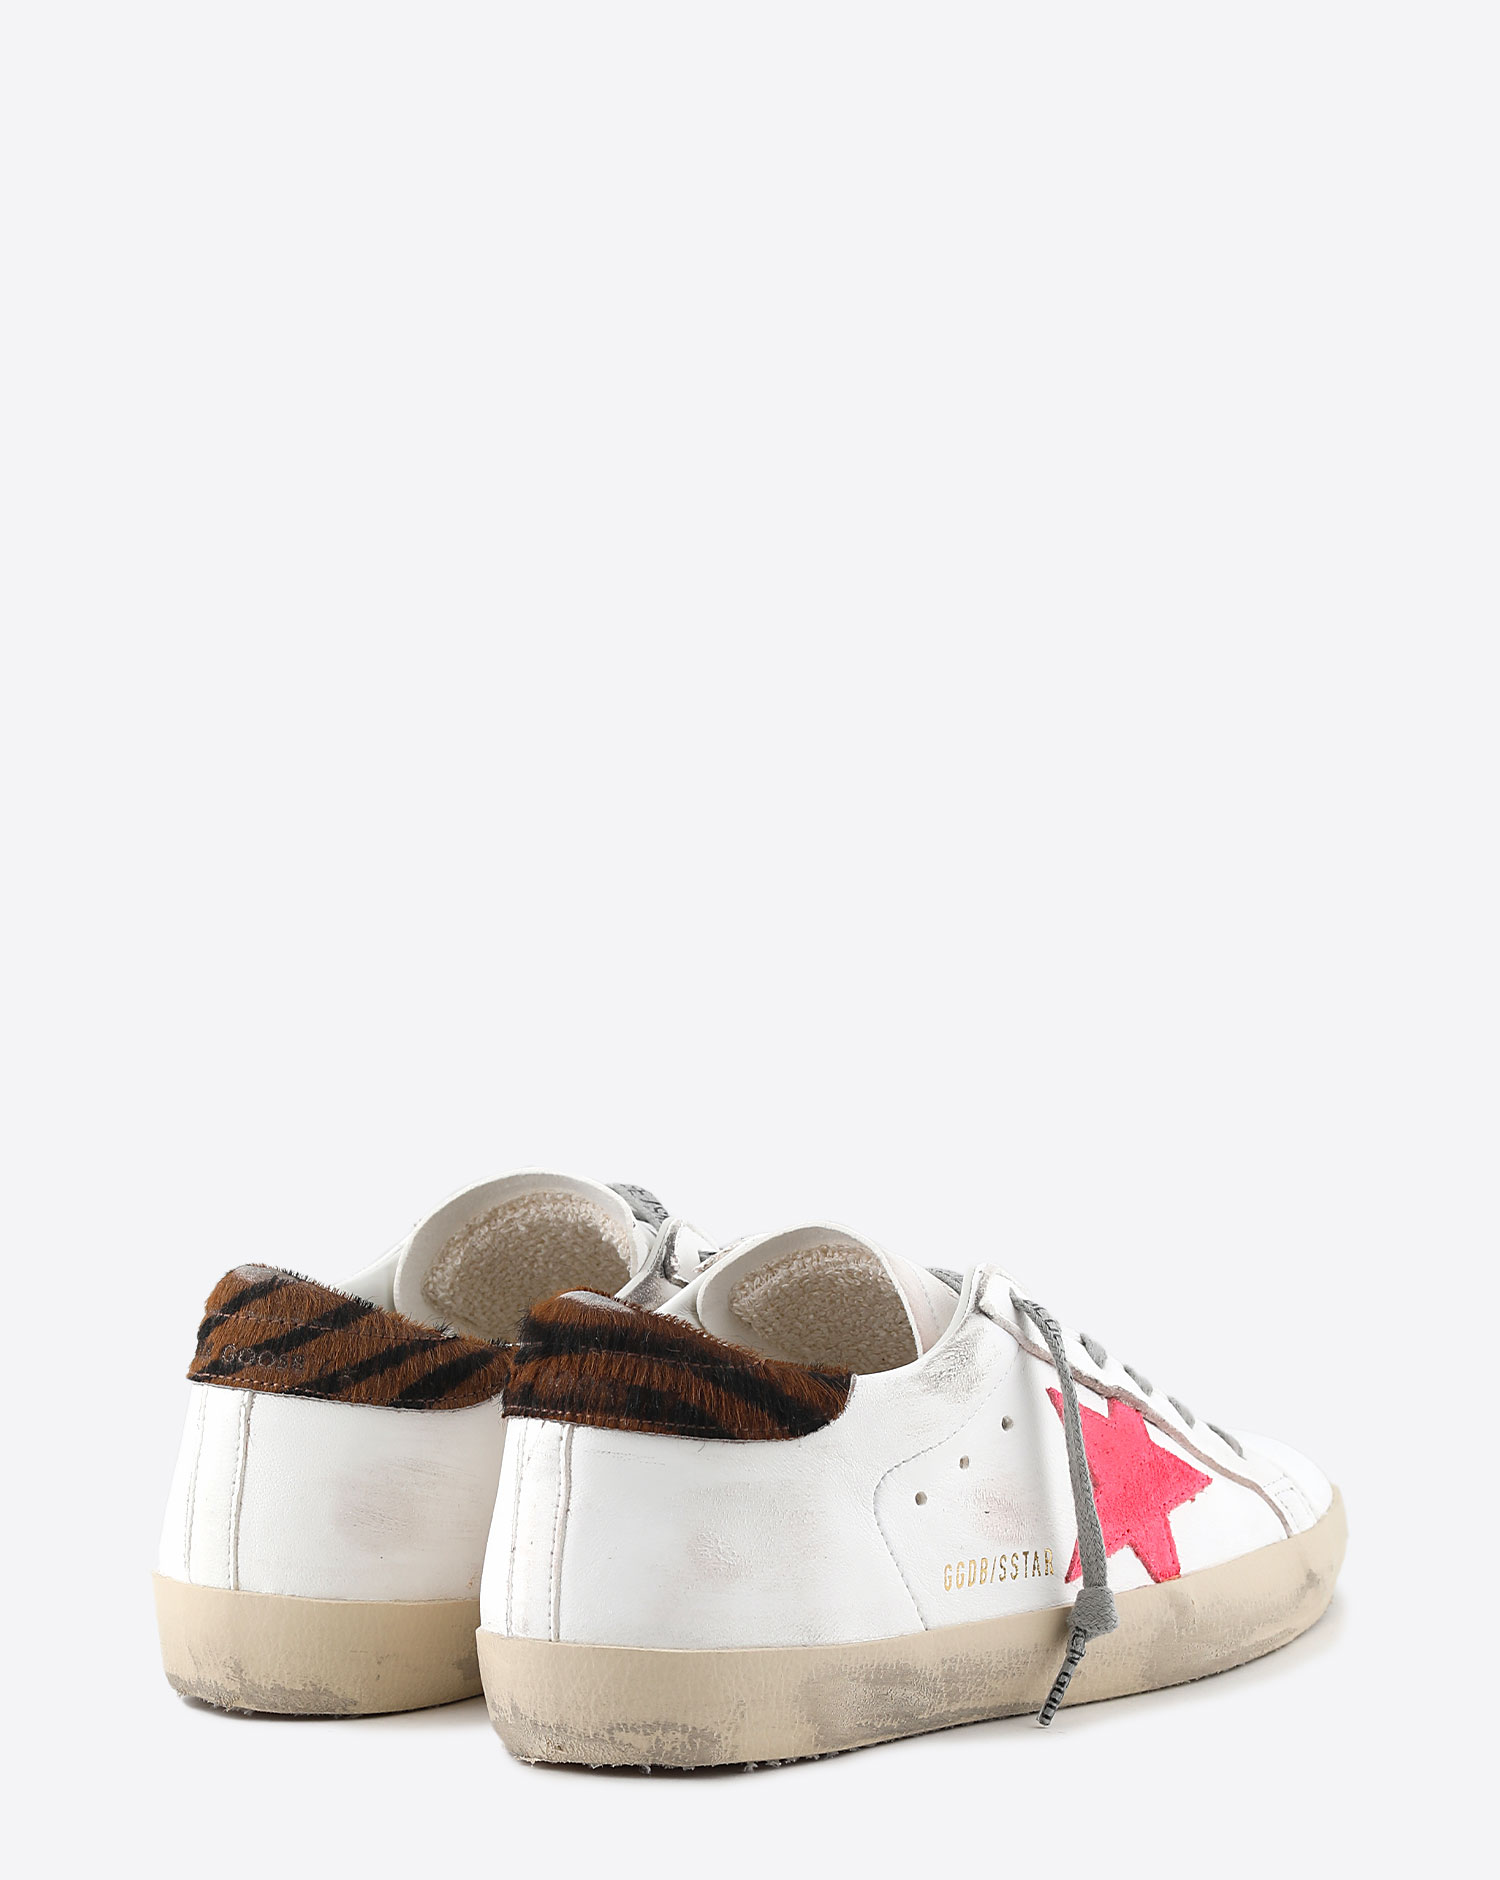 Sneakers Super-Star White Fluo Brown 11387 Golden Goose 